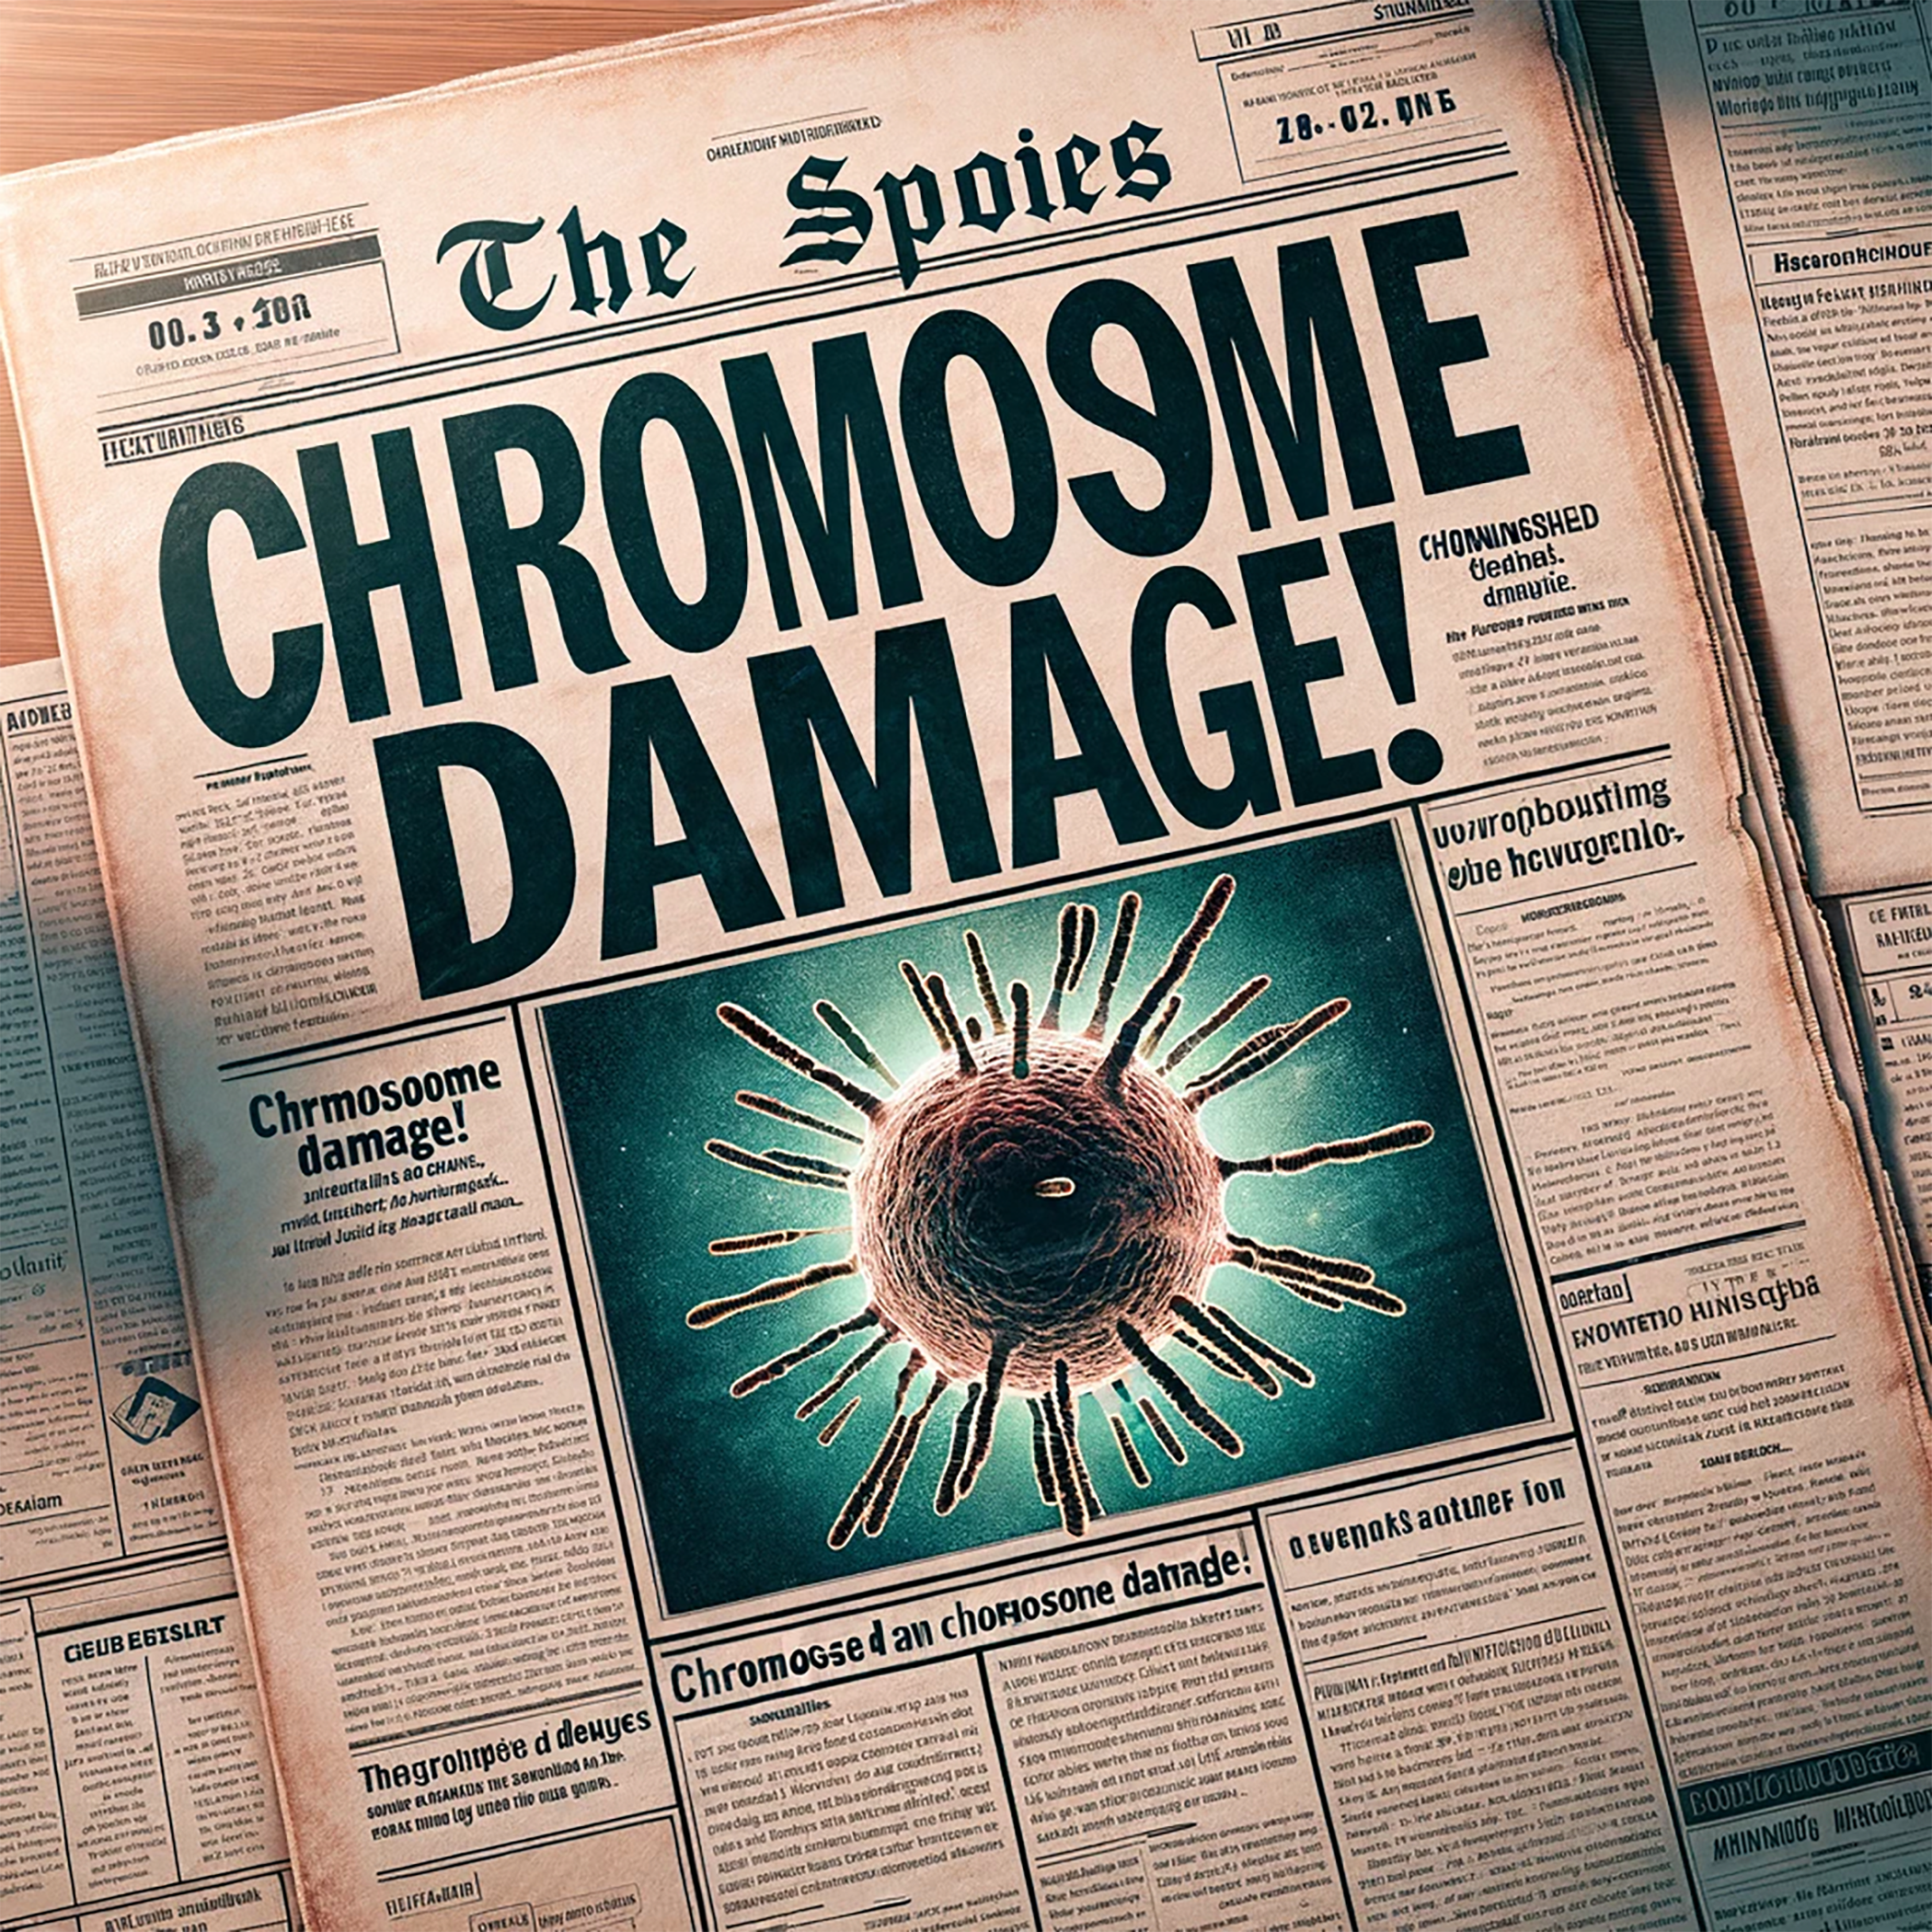 Chromosome Damage! In the news, with, with a slight "transcription error"
